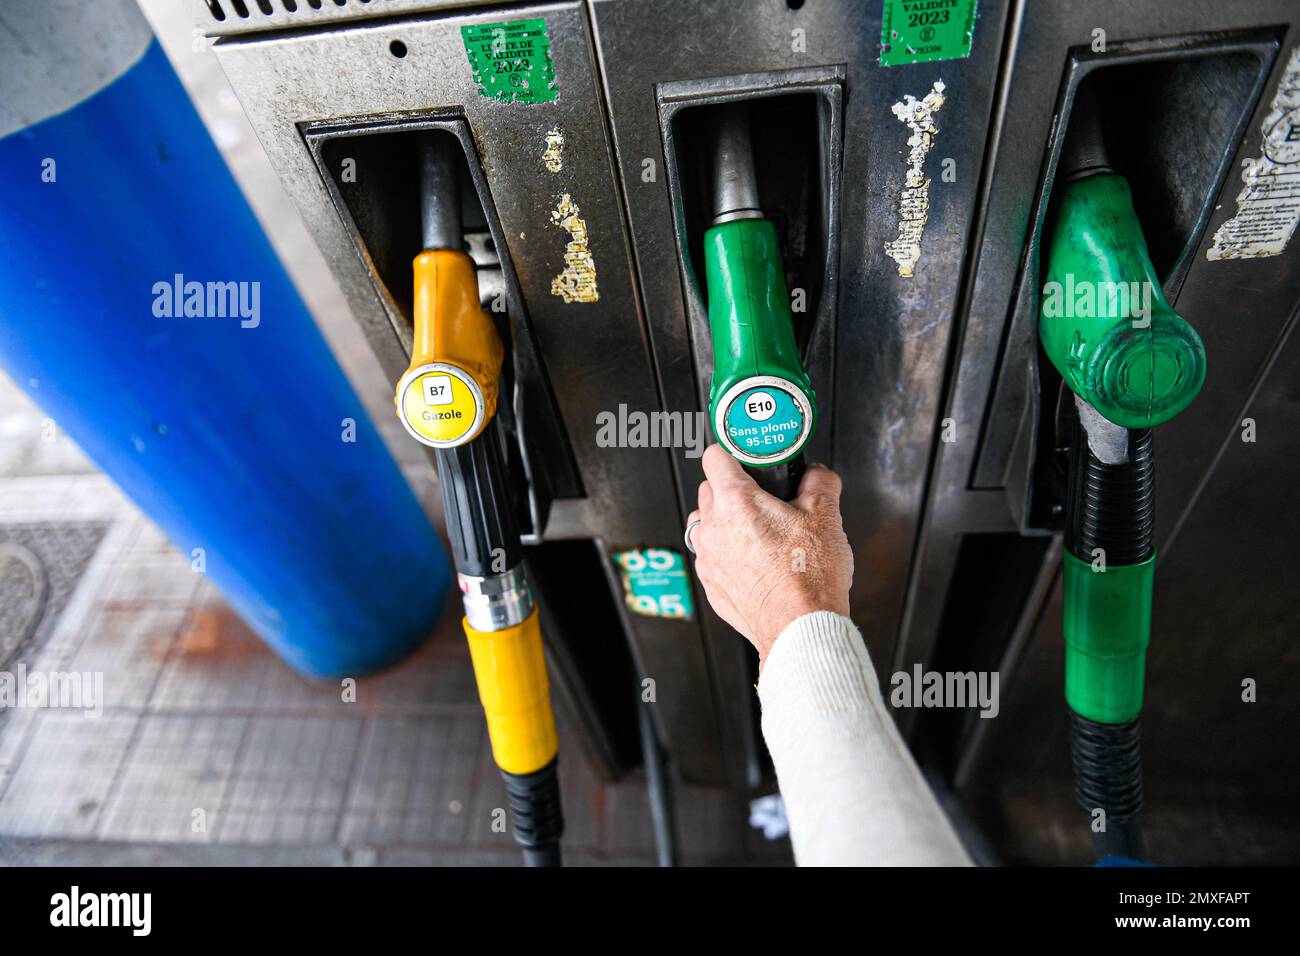 Illustration picture shows a person using a petrol pump (unleaded fuel,  "sans-plomb" "SP95-E10") for his car at a E.Leclerc (or Leclerc) gas  service station in Paris, France on February 3, 2023. Photo